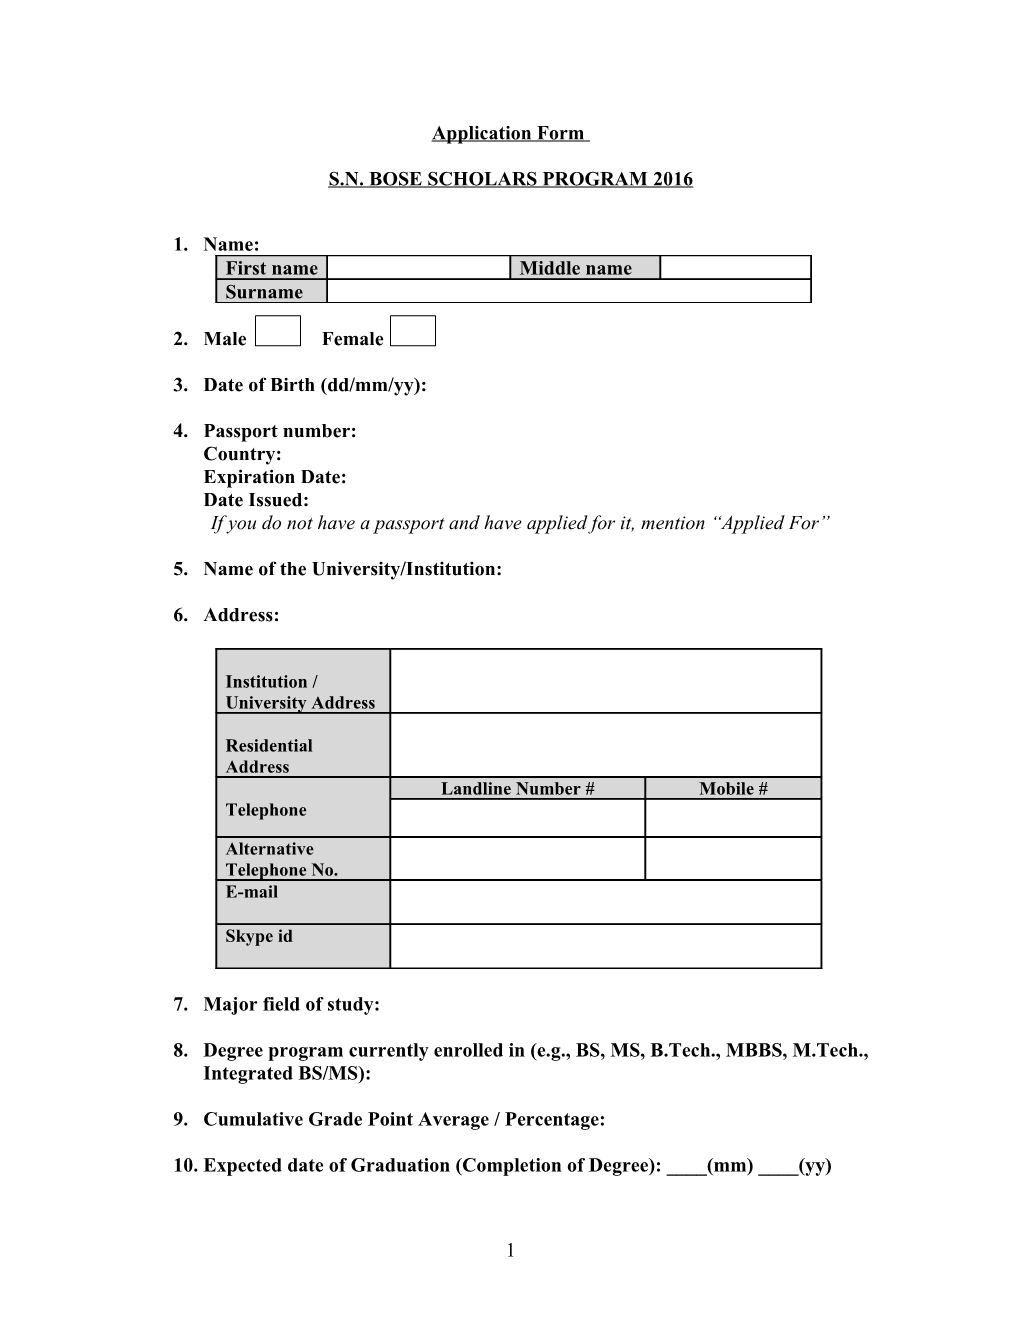 Application Form for Khorana Summer Research